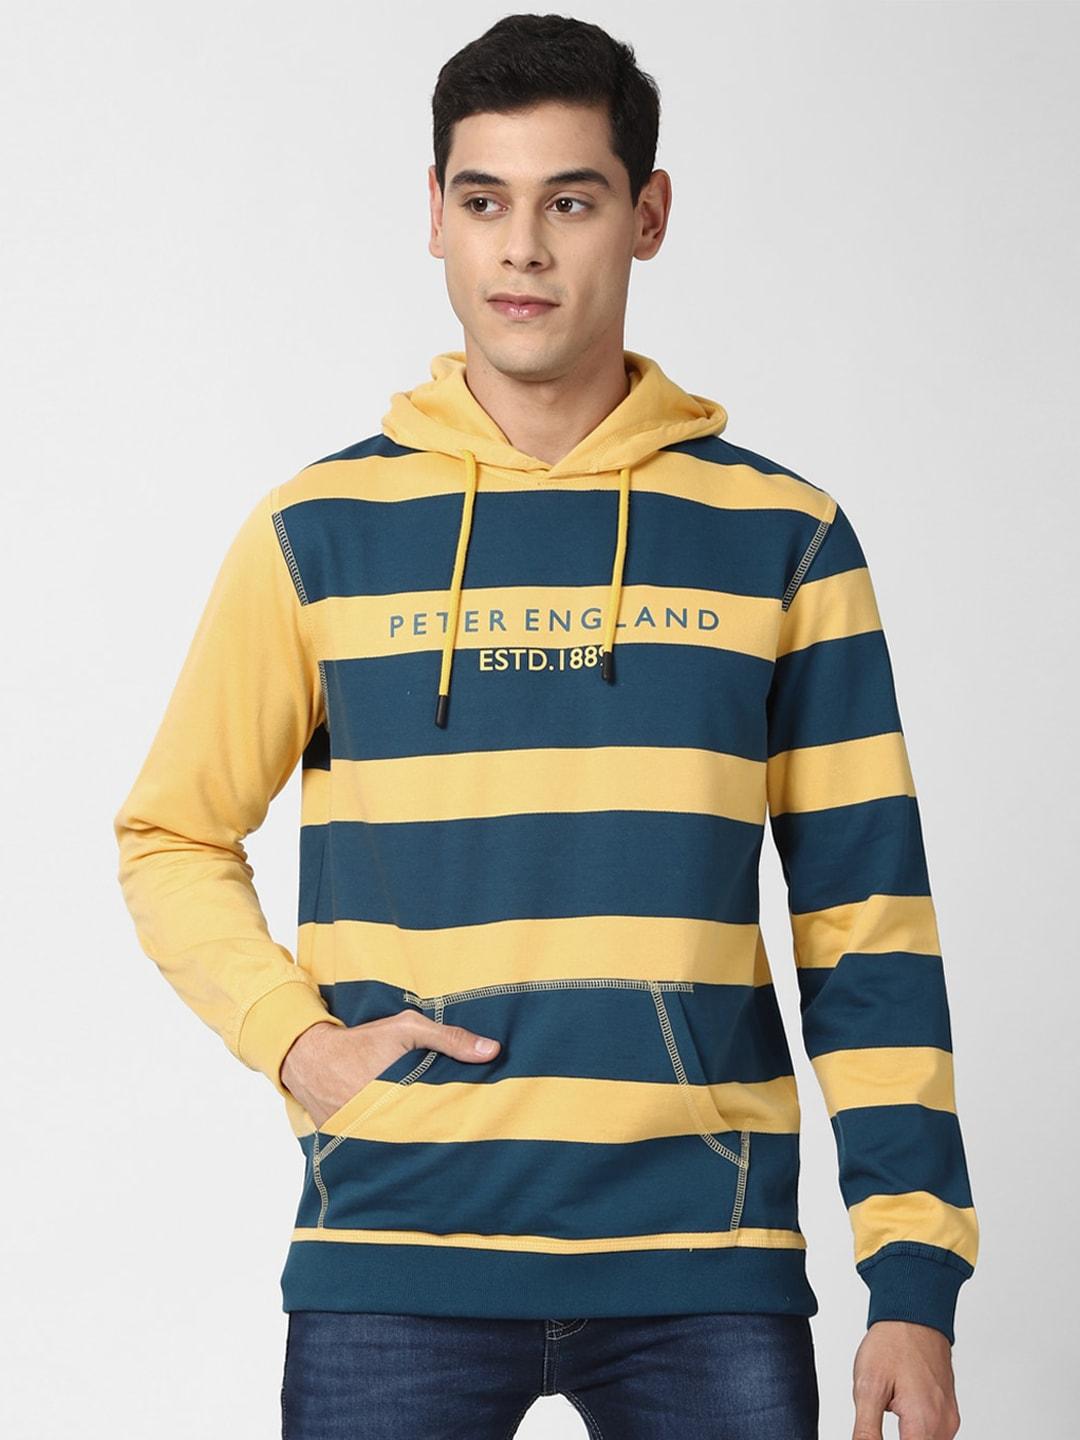 peter-england-casuals-men-yellow-&-teal-blue-striped-hooded-sweatshirt